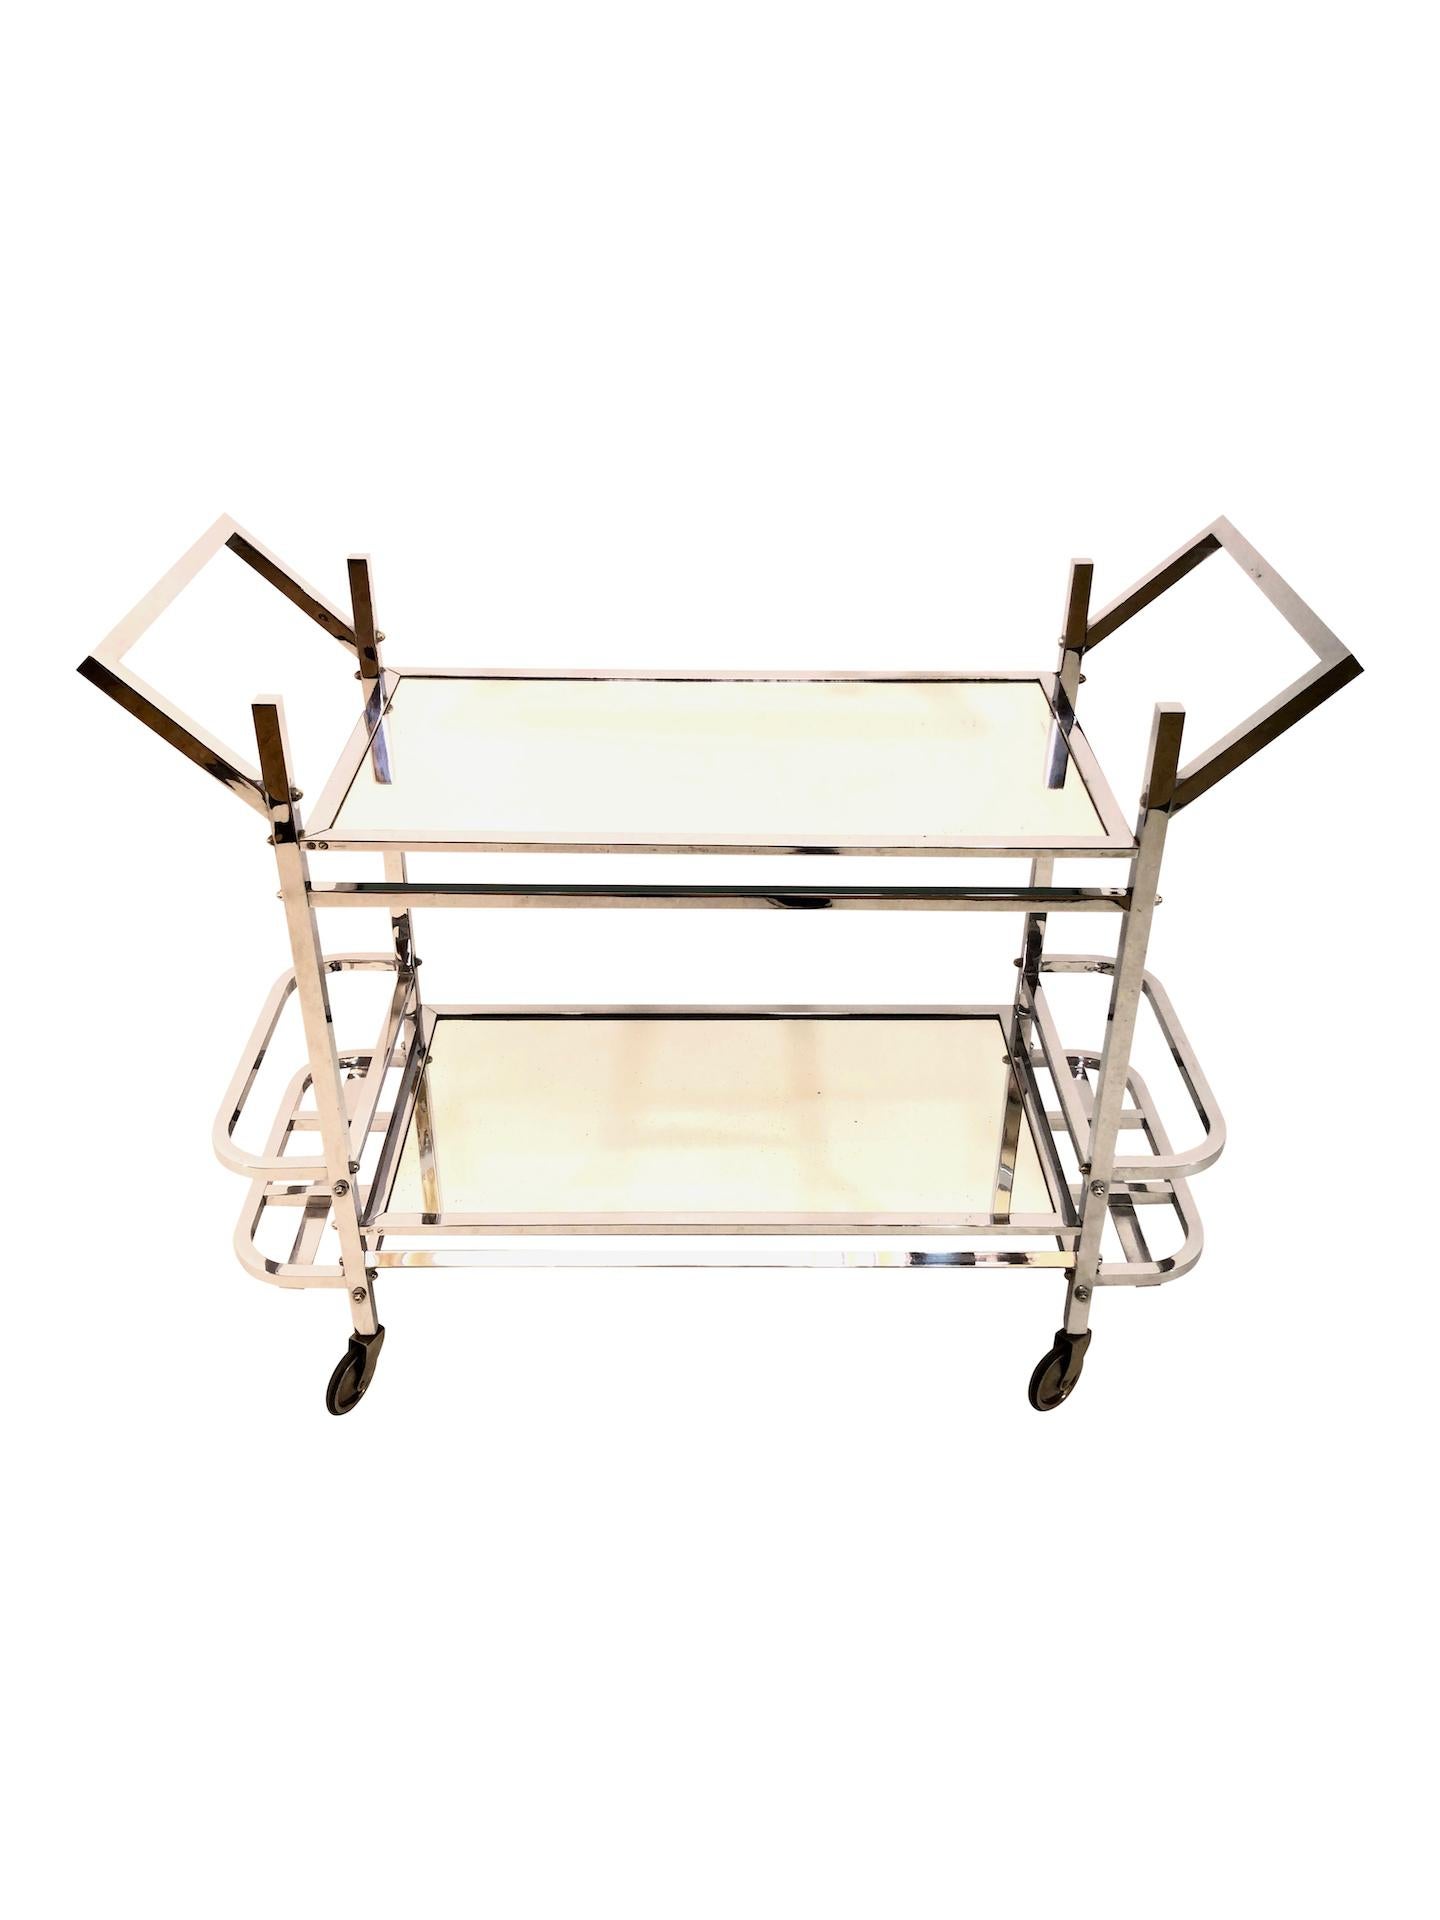 Modernistic Art Deco Bar Trolley / Tea Wagon
Original Chrome 
French Art Deco, 1930s 

Slim model: only 37 cm wide 

Pictures take in a warm lighted ambience. 
Surface is chromed! 